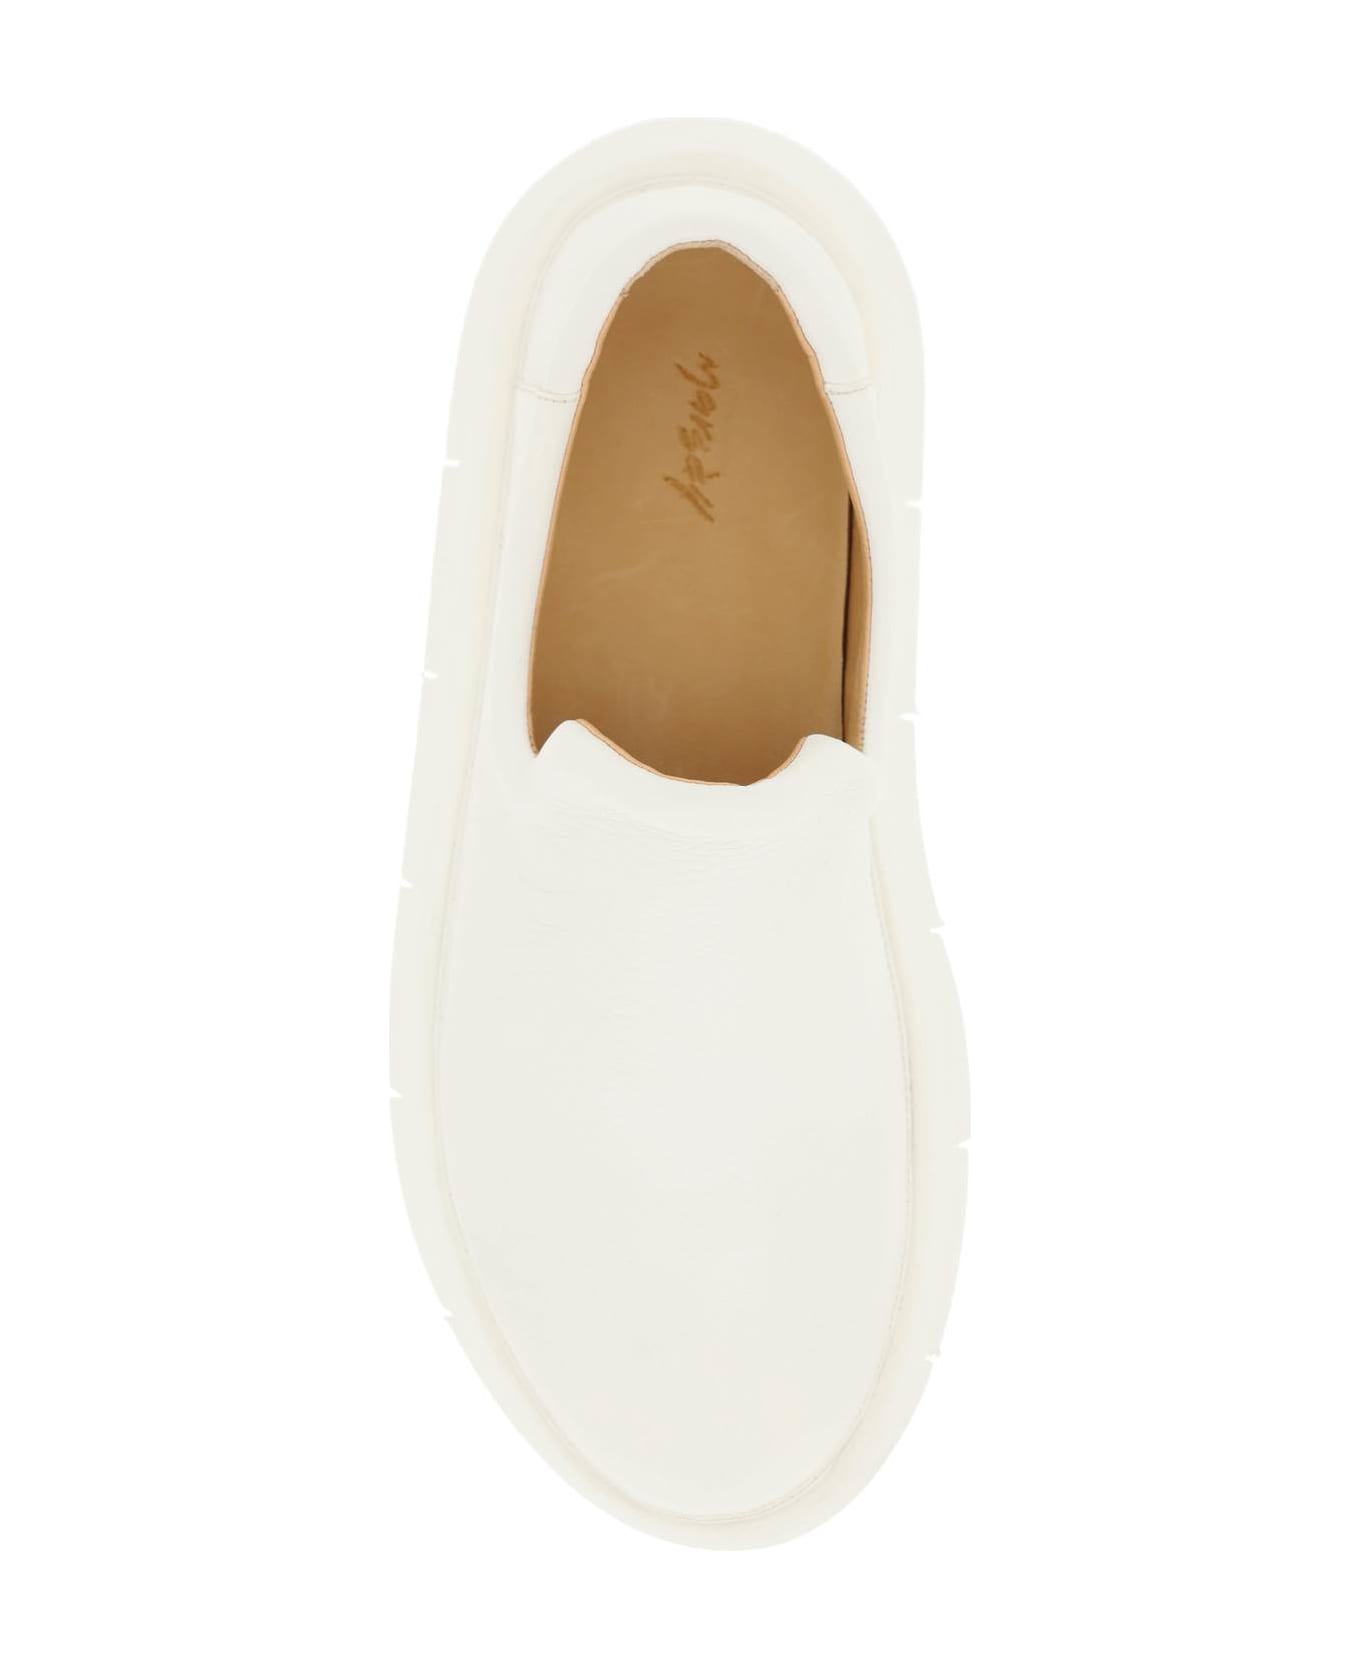 Marsell 'intagliata' Grained Leather Slip-on Shoes - BIANCO OPTICAL (White) スニーカー